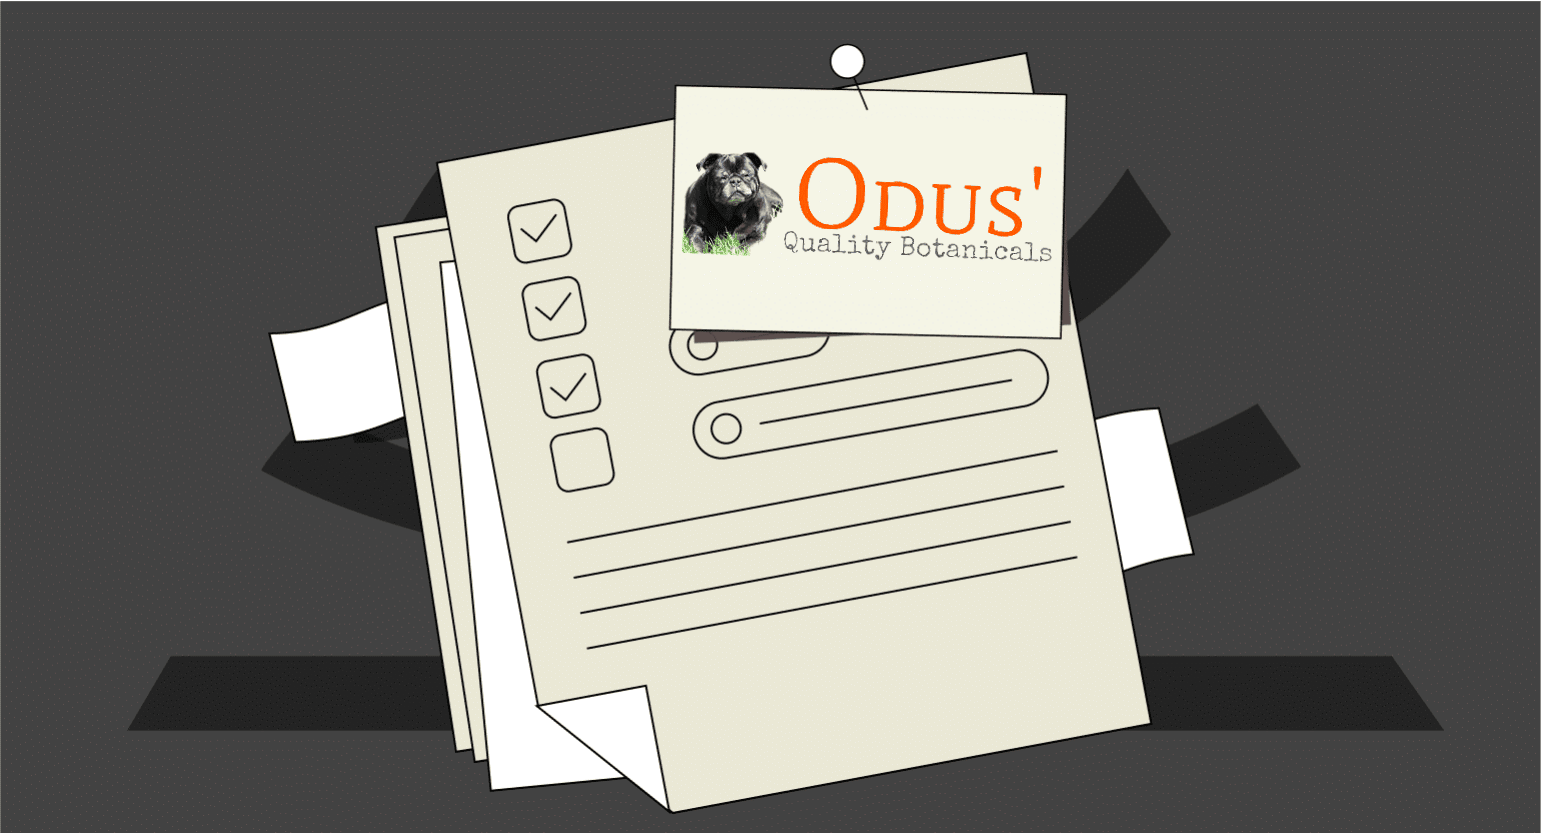 Odus’ Quality Botanicals Review: Product Selection, Safety & More